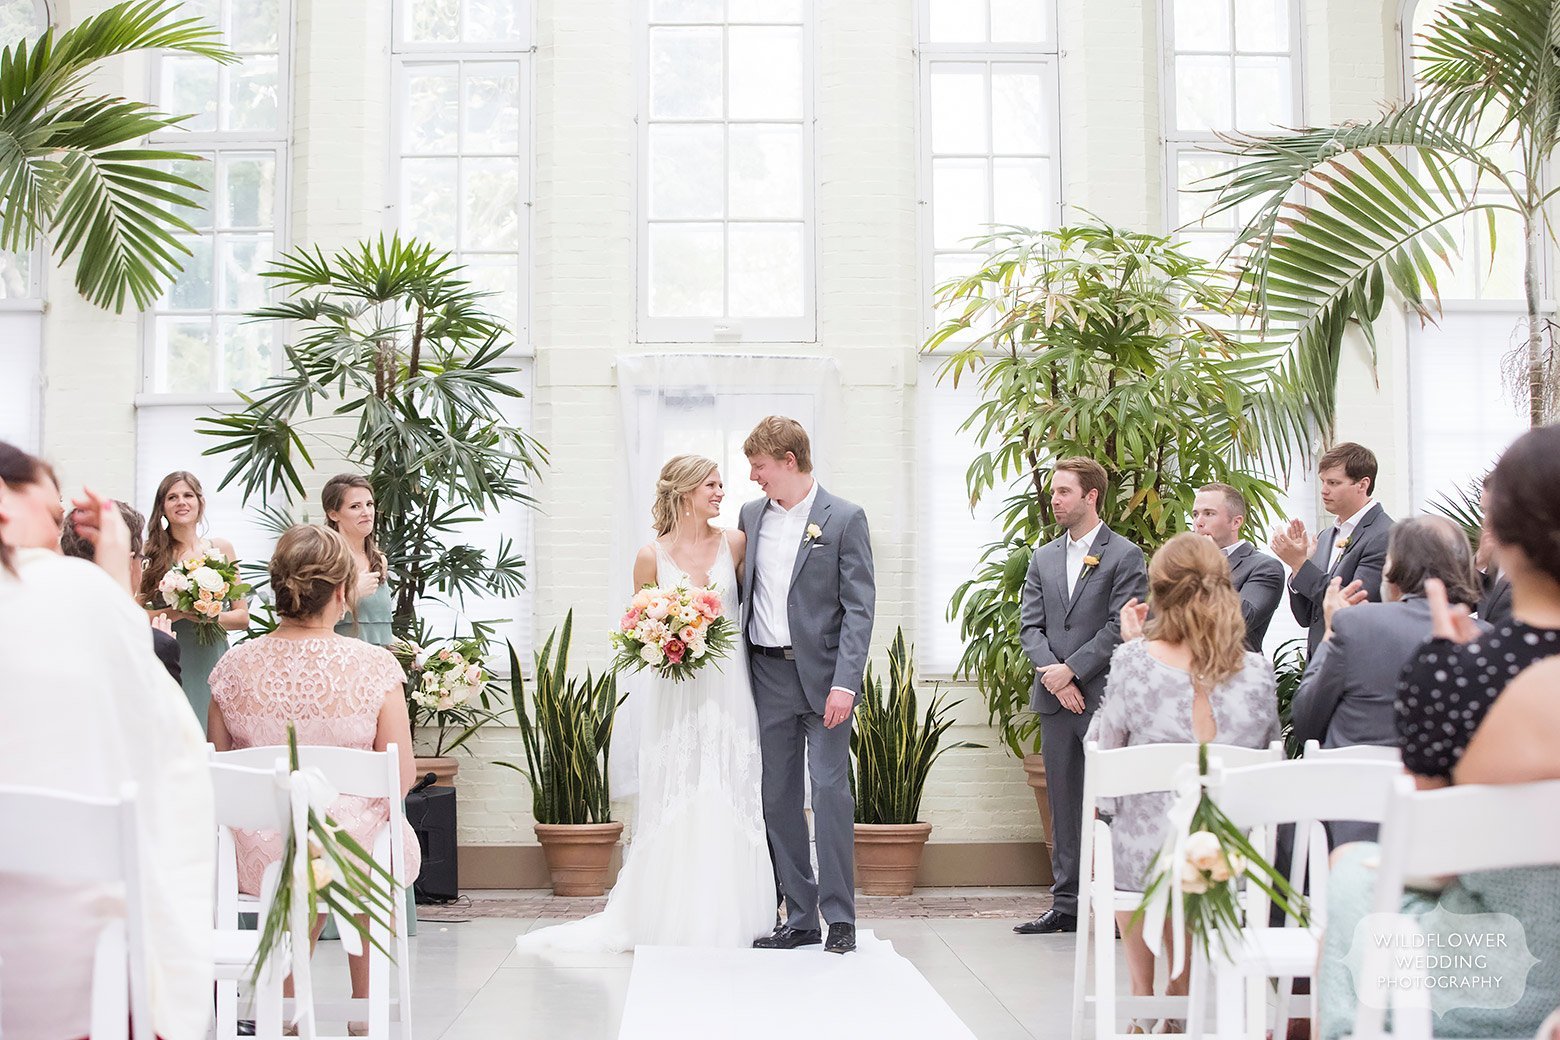 Bride and groom smile after ceremony at indoor greenhouse in St. Louis park.